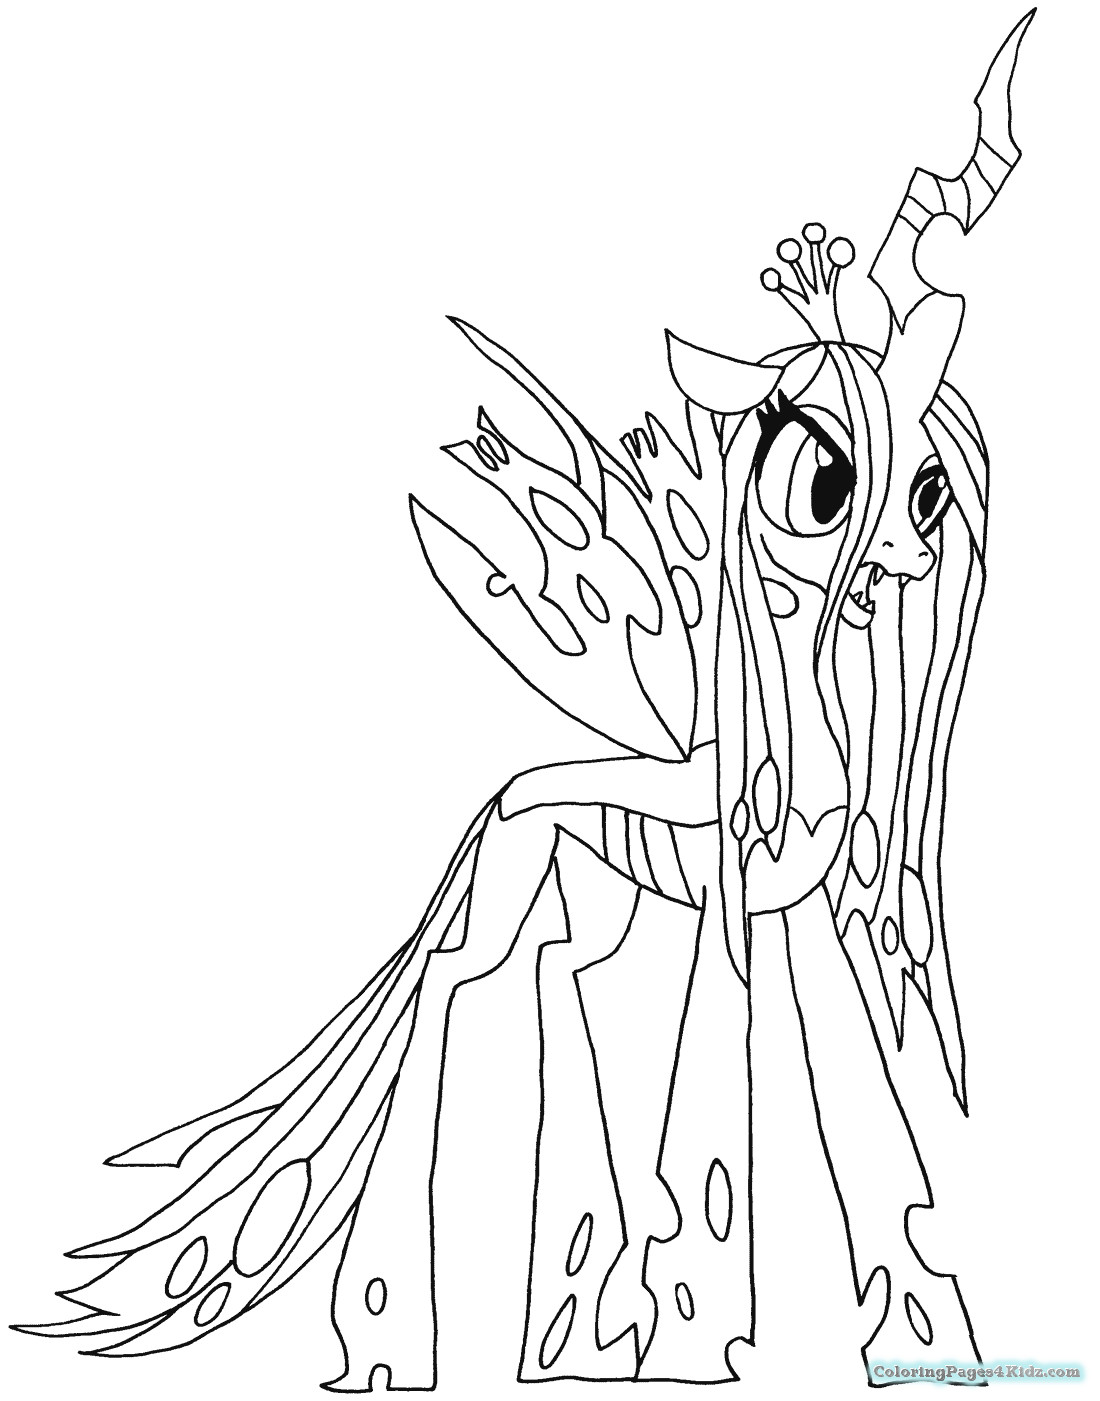 Nightmare Moon Coloring Pages
 My Little Pony Friendship Is Magic Coloring Pages